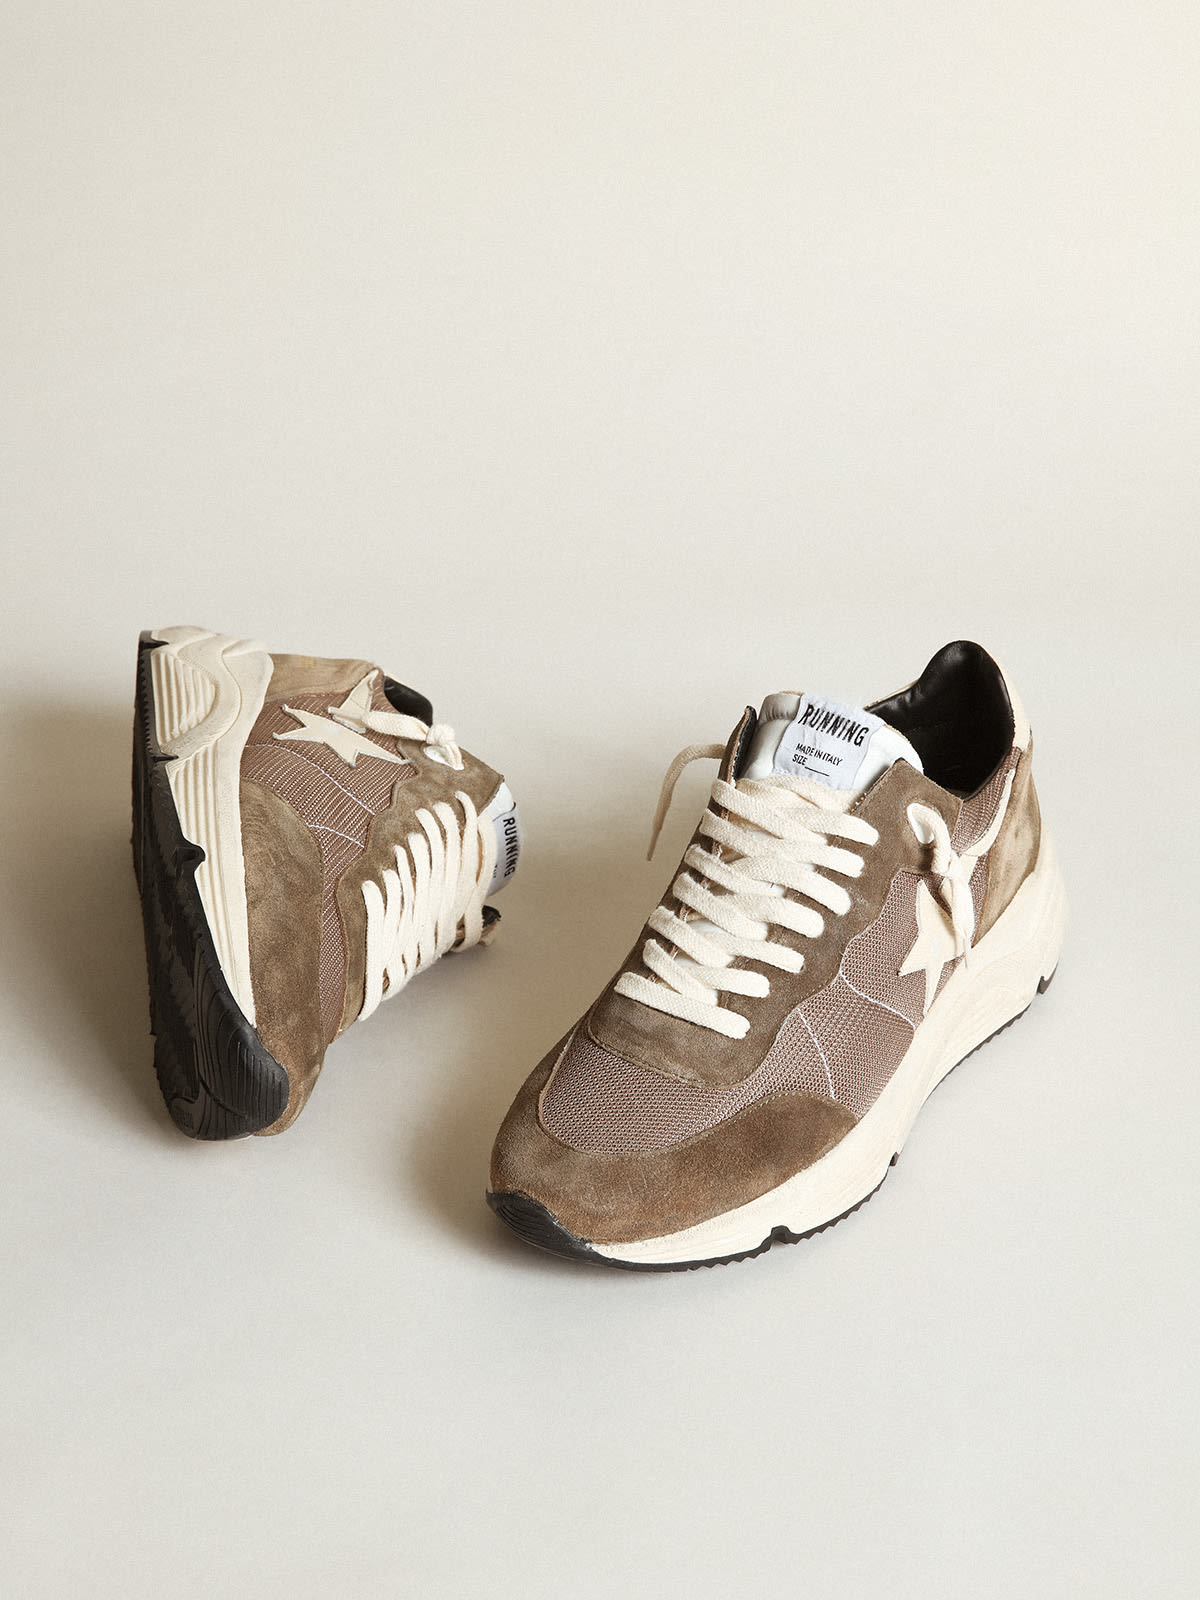 Golden Goose - Running Sole sneakers in olive-green mesh and leather with cream-colored leather star and heel tab in 